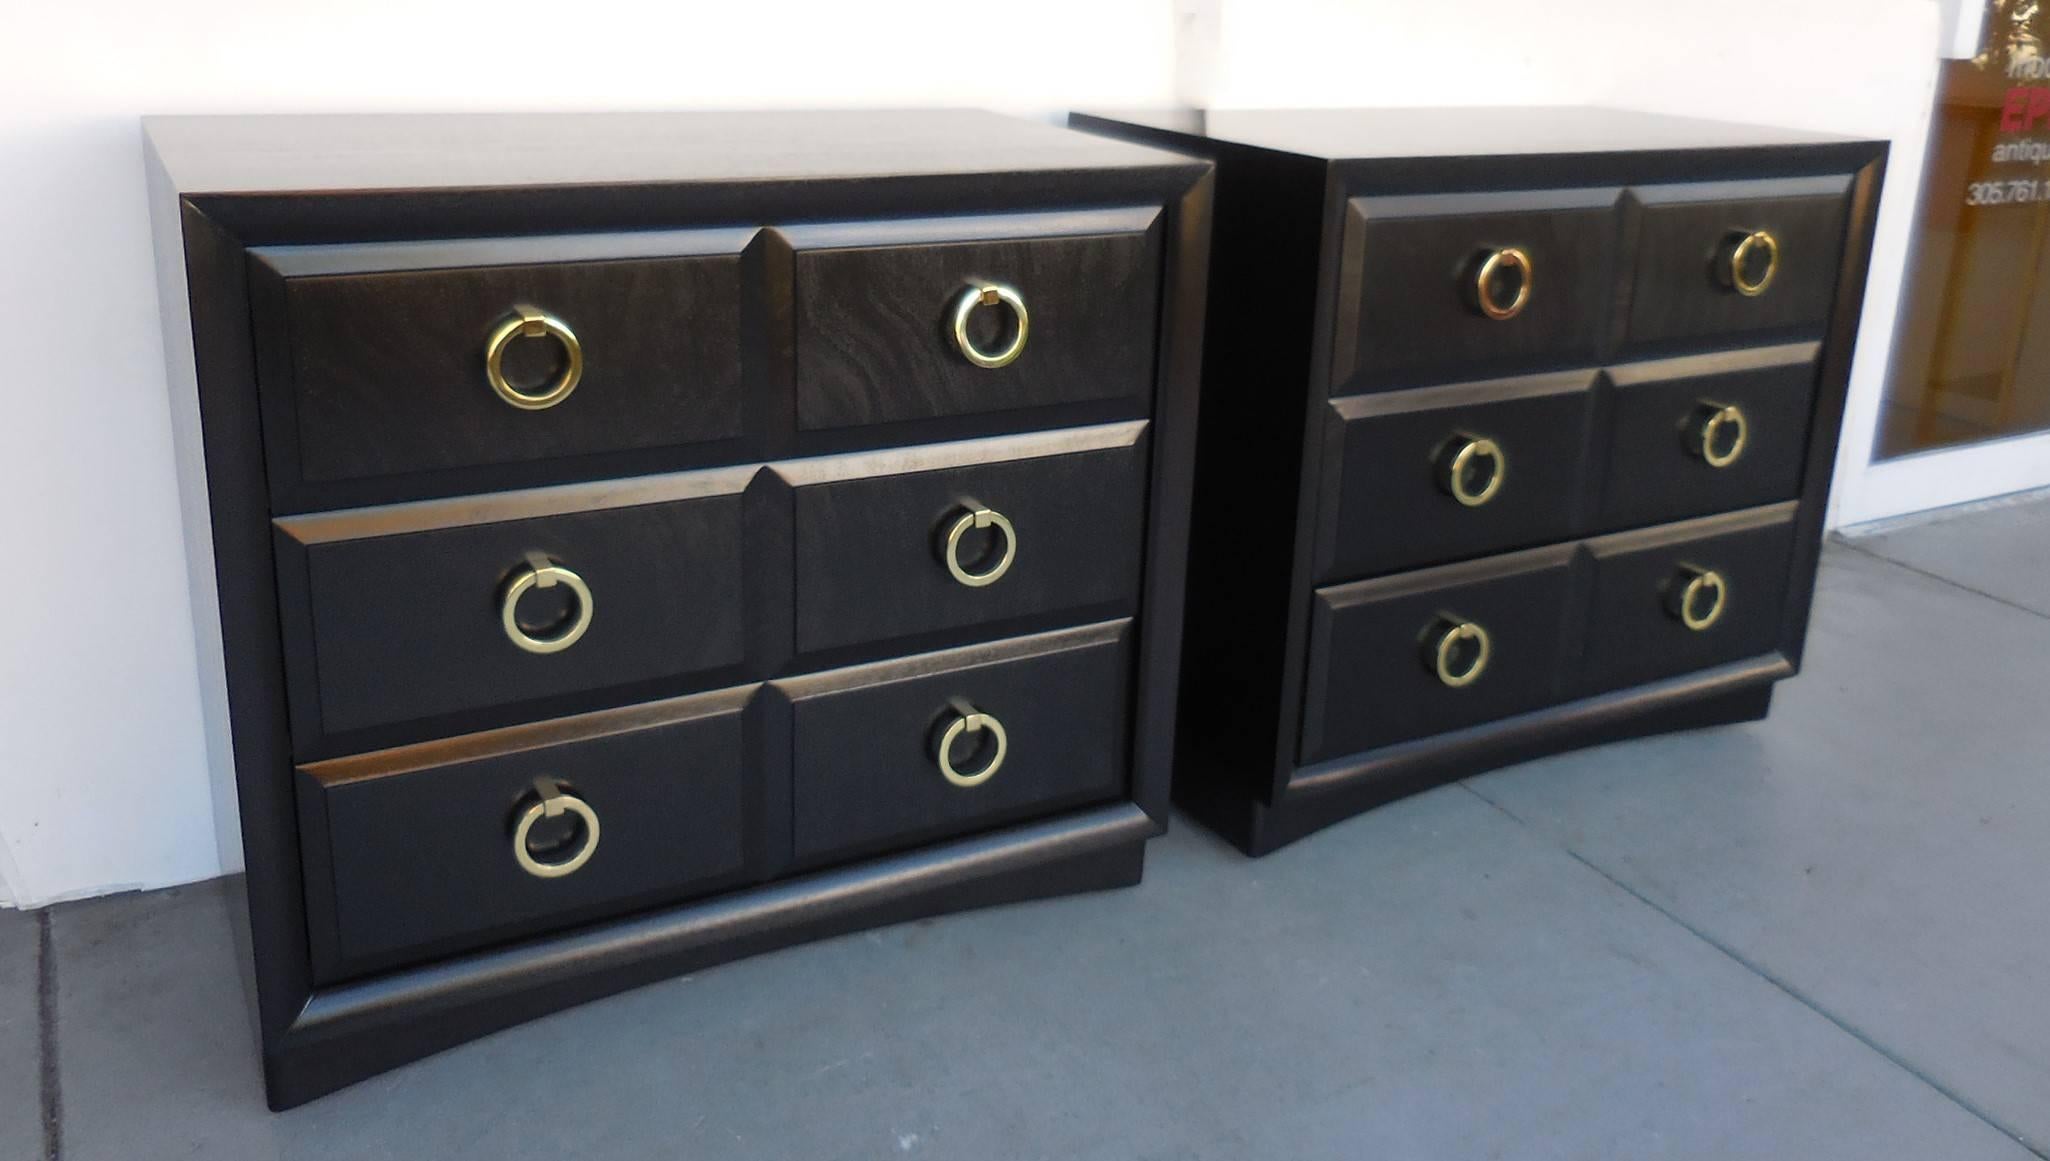 Classic and modern pair of cabinets. Three deep drawers for lots of storage. Original brass pulls. Newly re-finished in ebony stain retaining the wood undertones. Ideal for bed side tables. Finished backs as well.